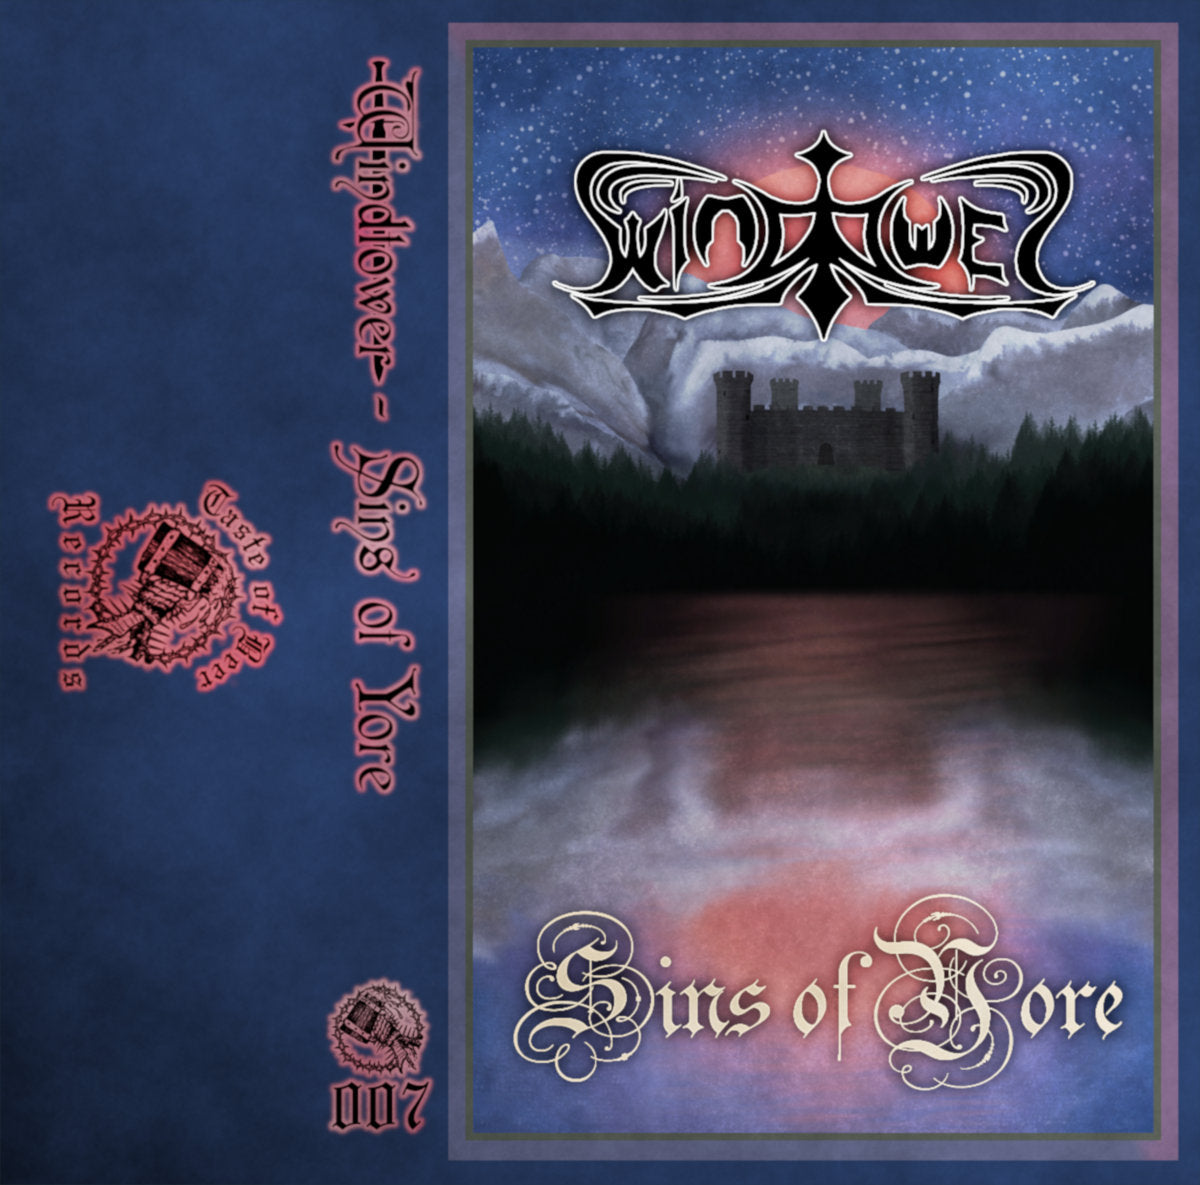 [SOLD OUT] WINDTOWER "Sins of Yore" cassette tape (lim.50)